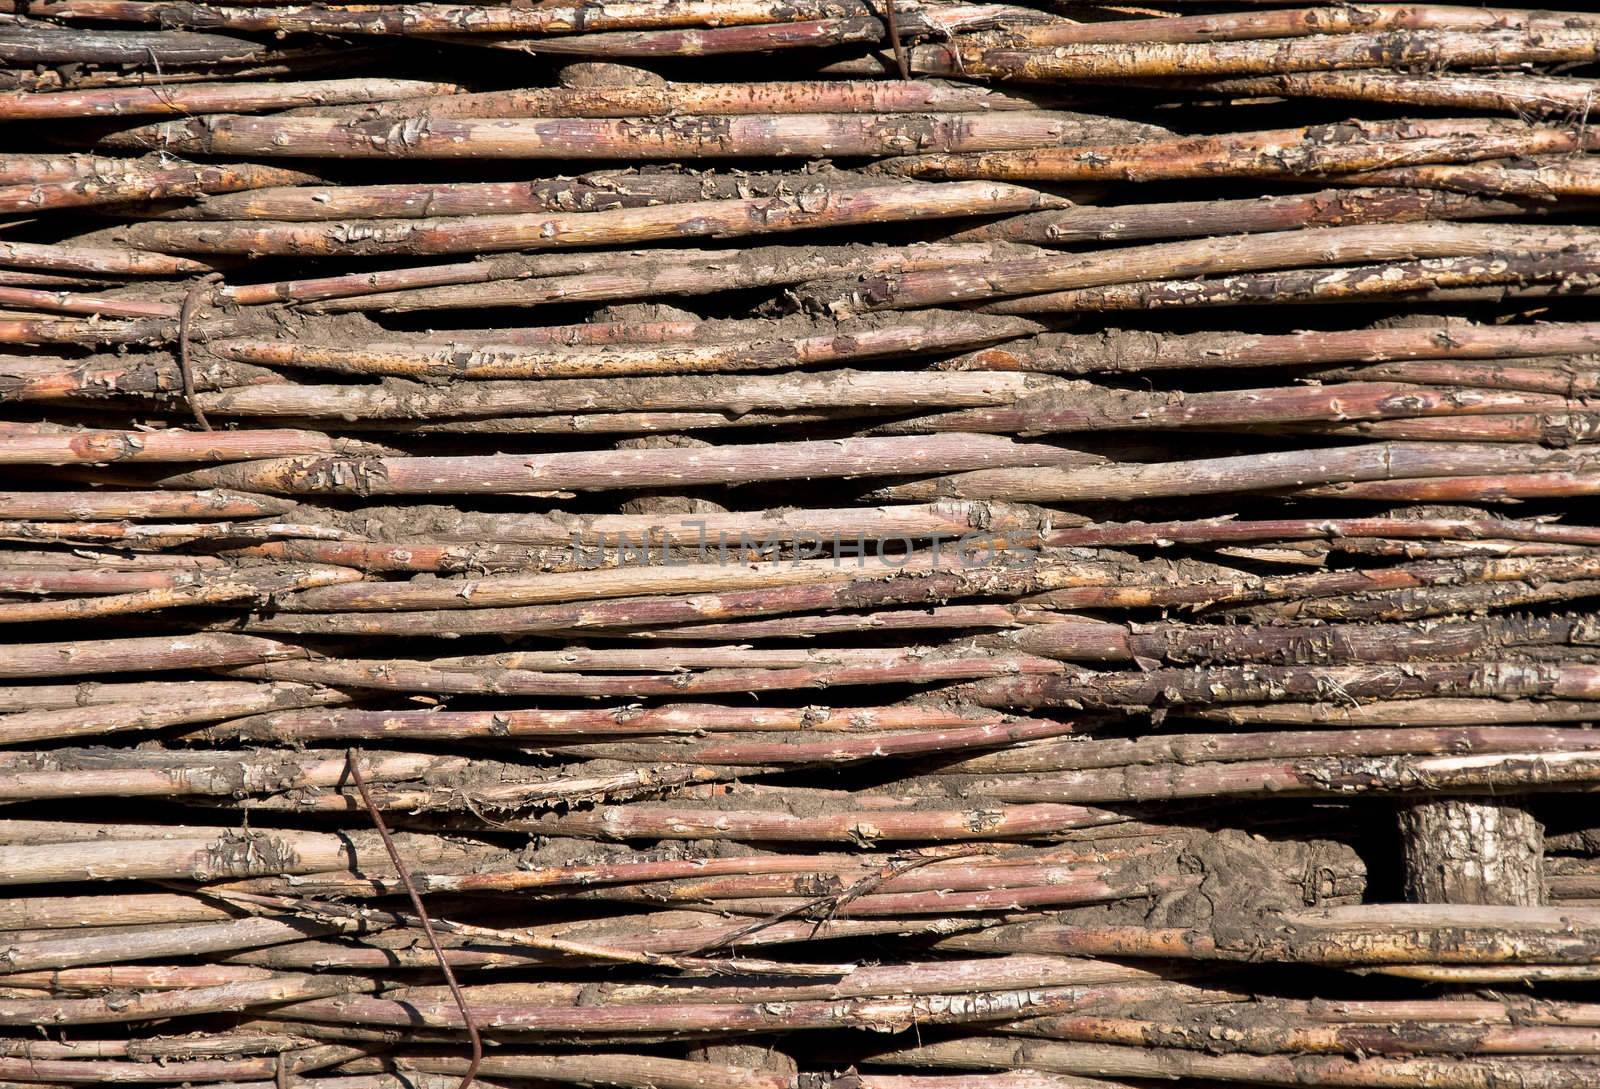 Texture of woven wood. Fencing. Close-up, front.